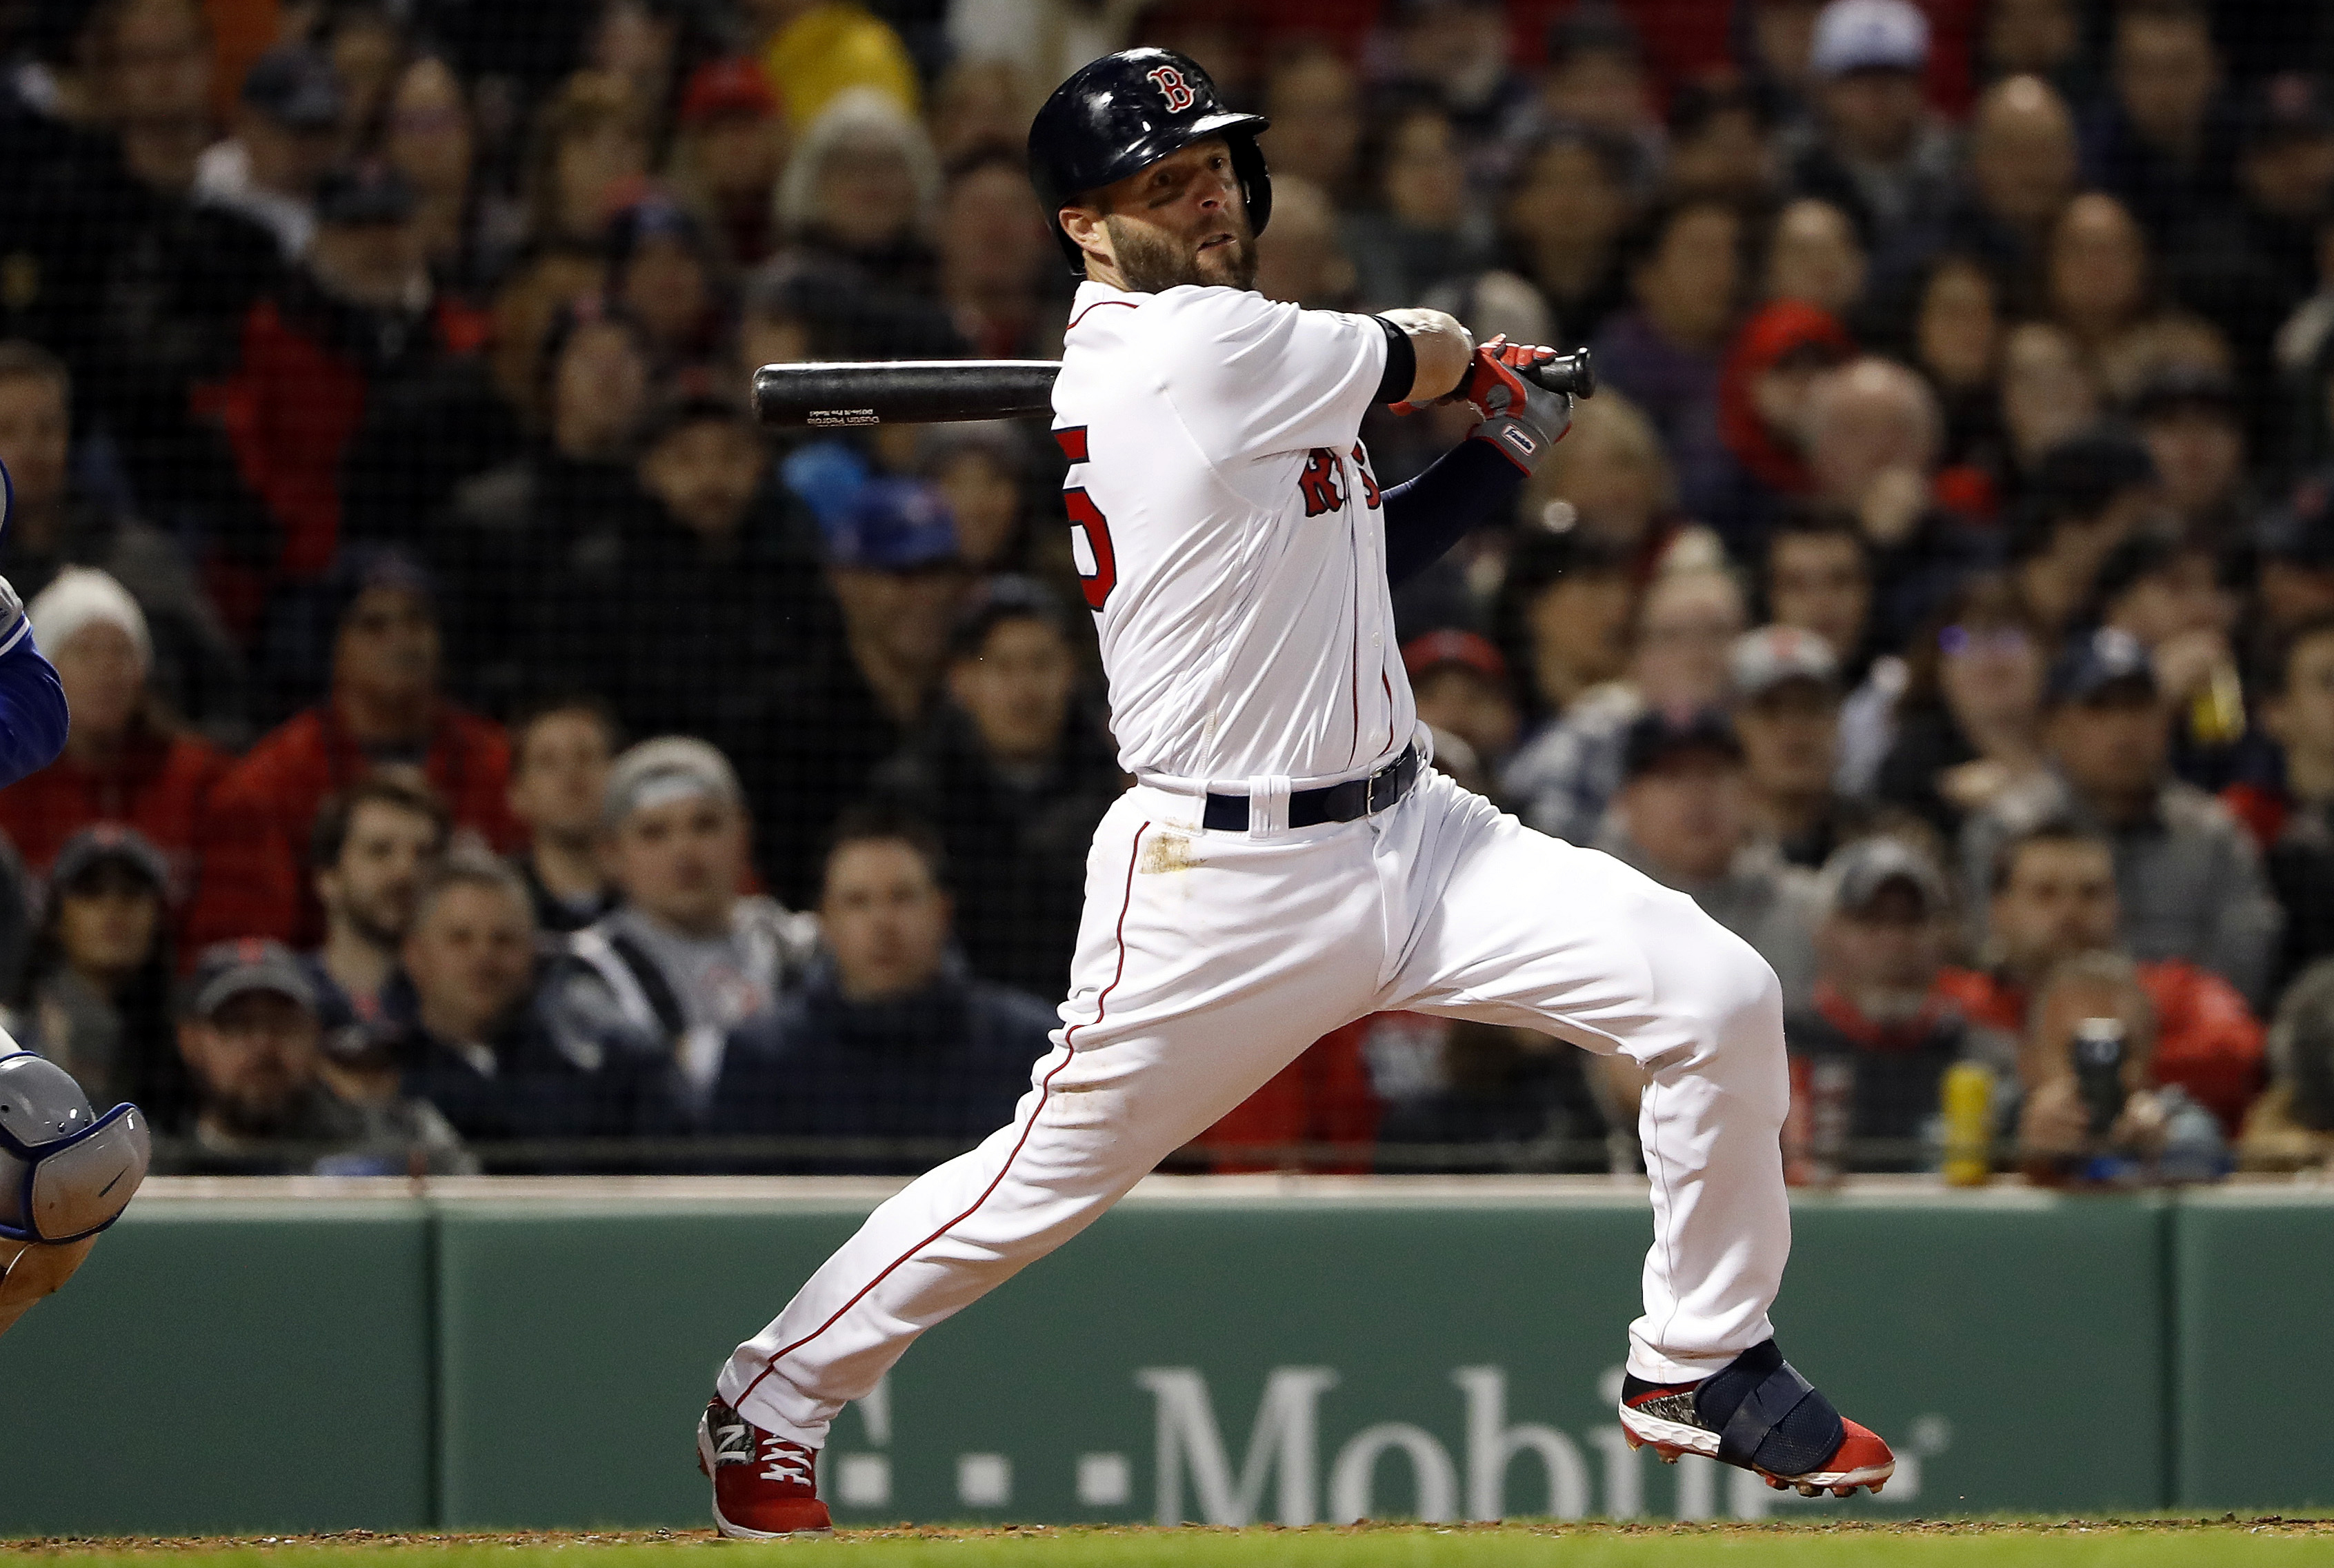 Red Sox 2B Pedroia put on 60-day IL, future in doubt